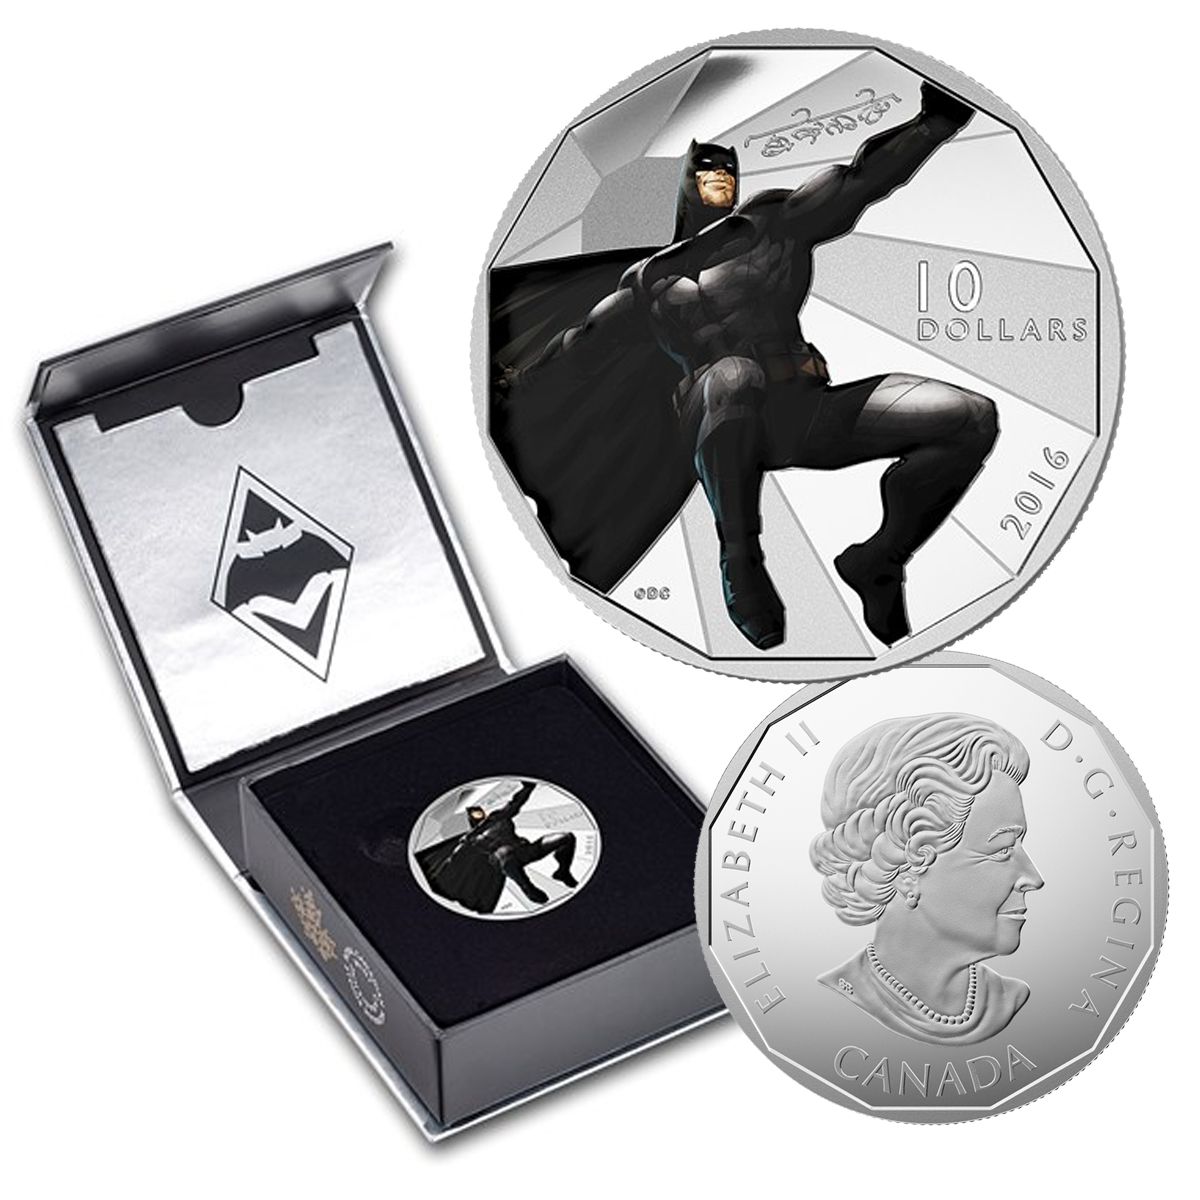 2 PC BATMAN V SUPERMAN DC STAR WARS THE FORCE AWAKENS JEDI THE FORCE GIFT COIN 